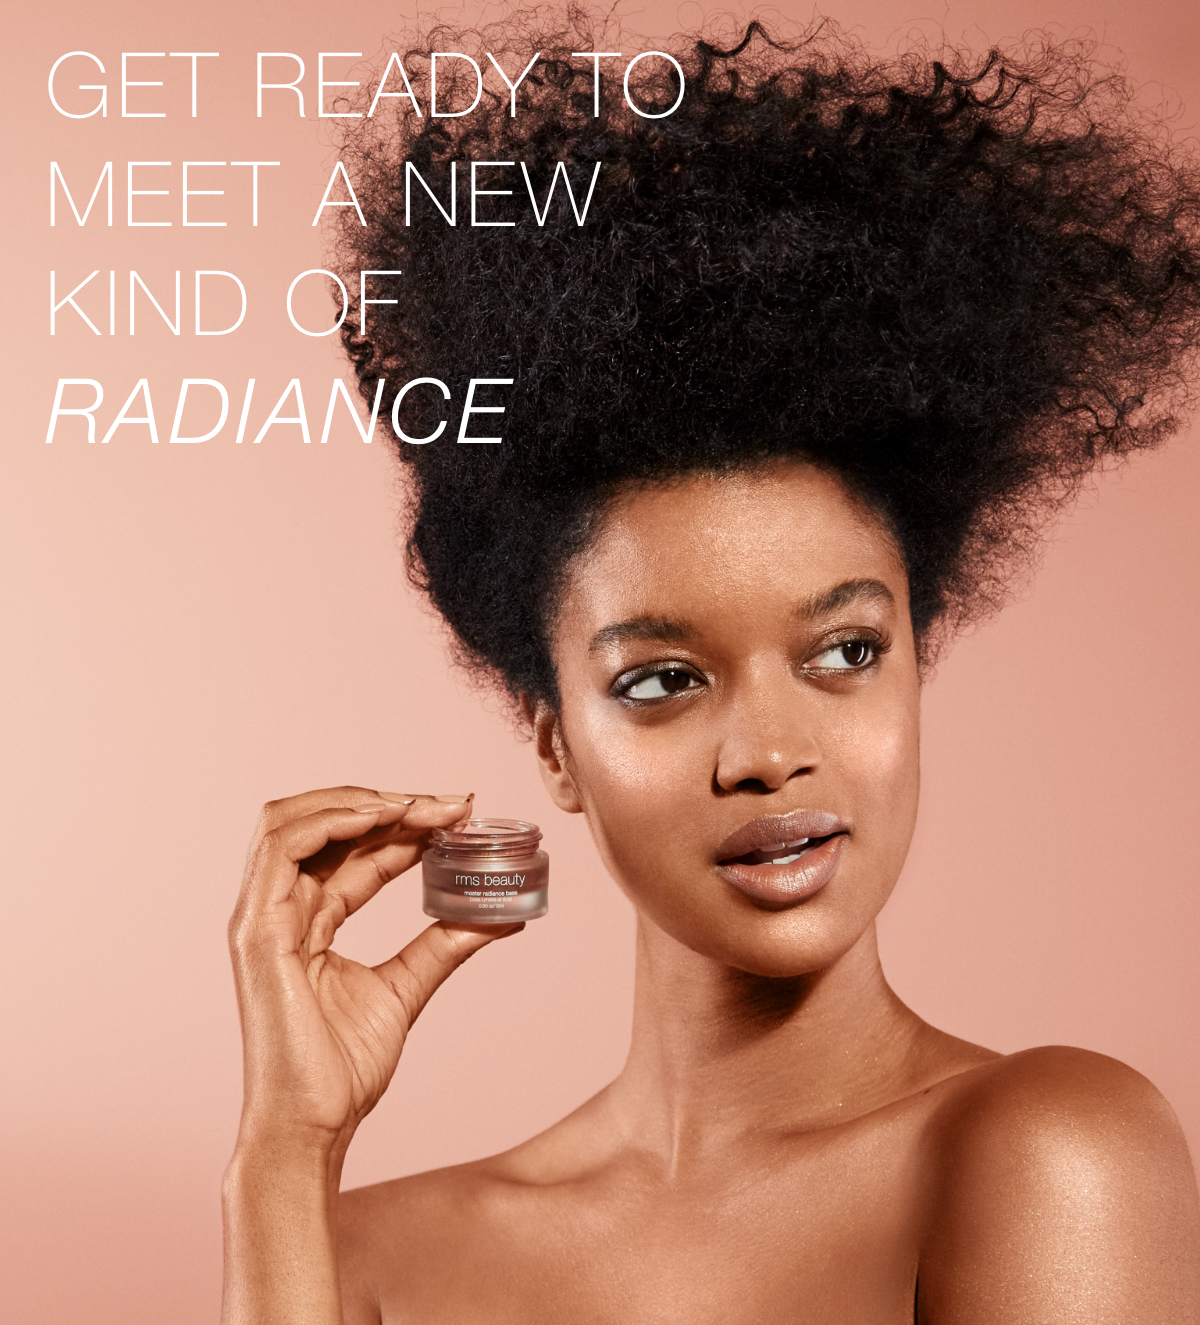 get ready to meet a new kind of radiance september 10th